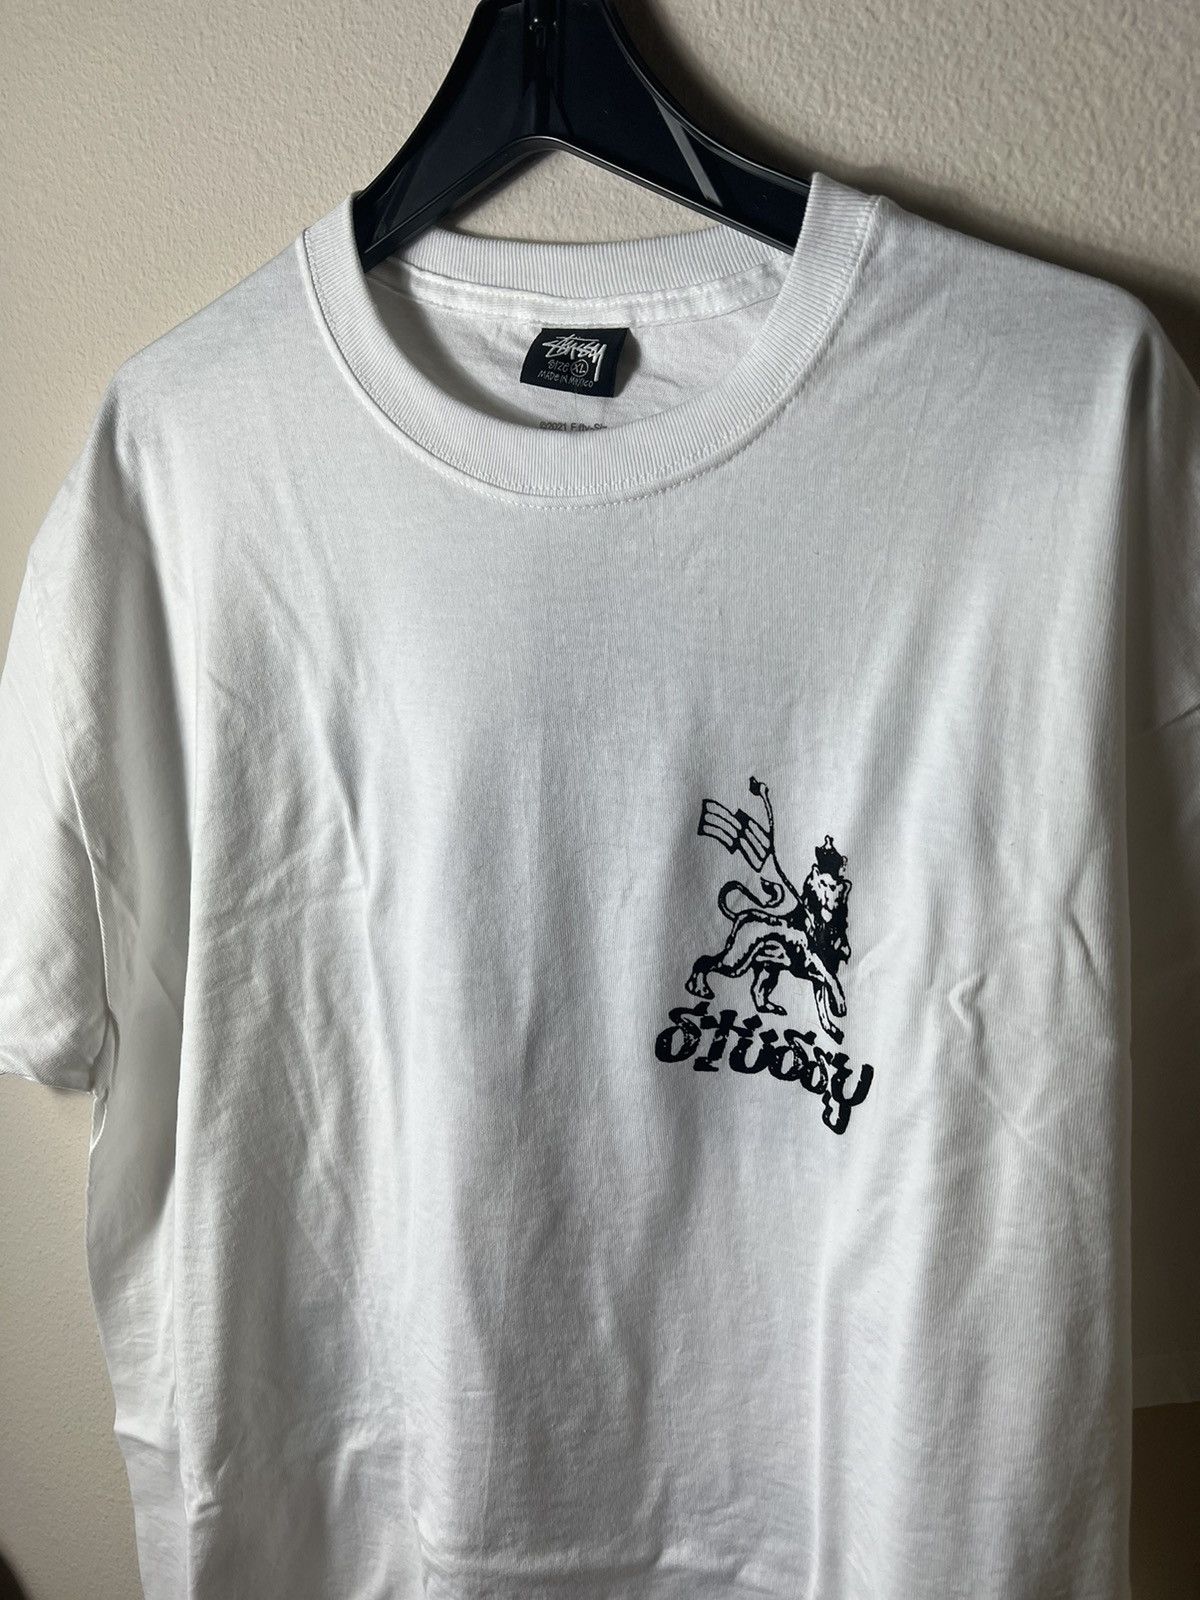 Vintage Stüssy Exodus Tee Bob Marley and The Waylers 2021 Size US XL / EU 56 / 4 - 2 Preview